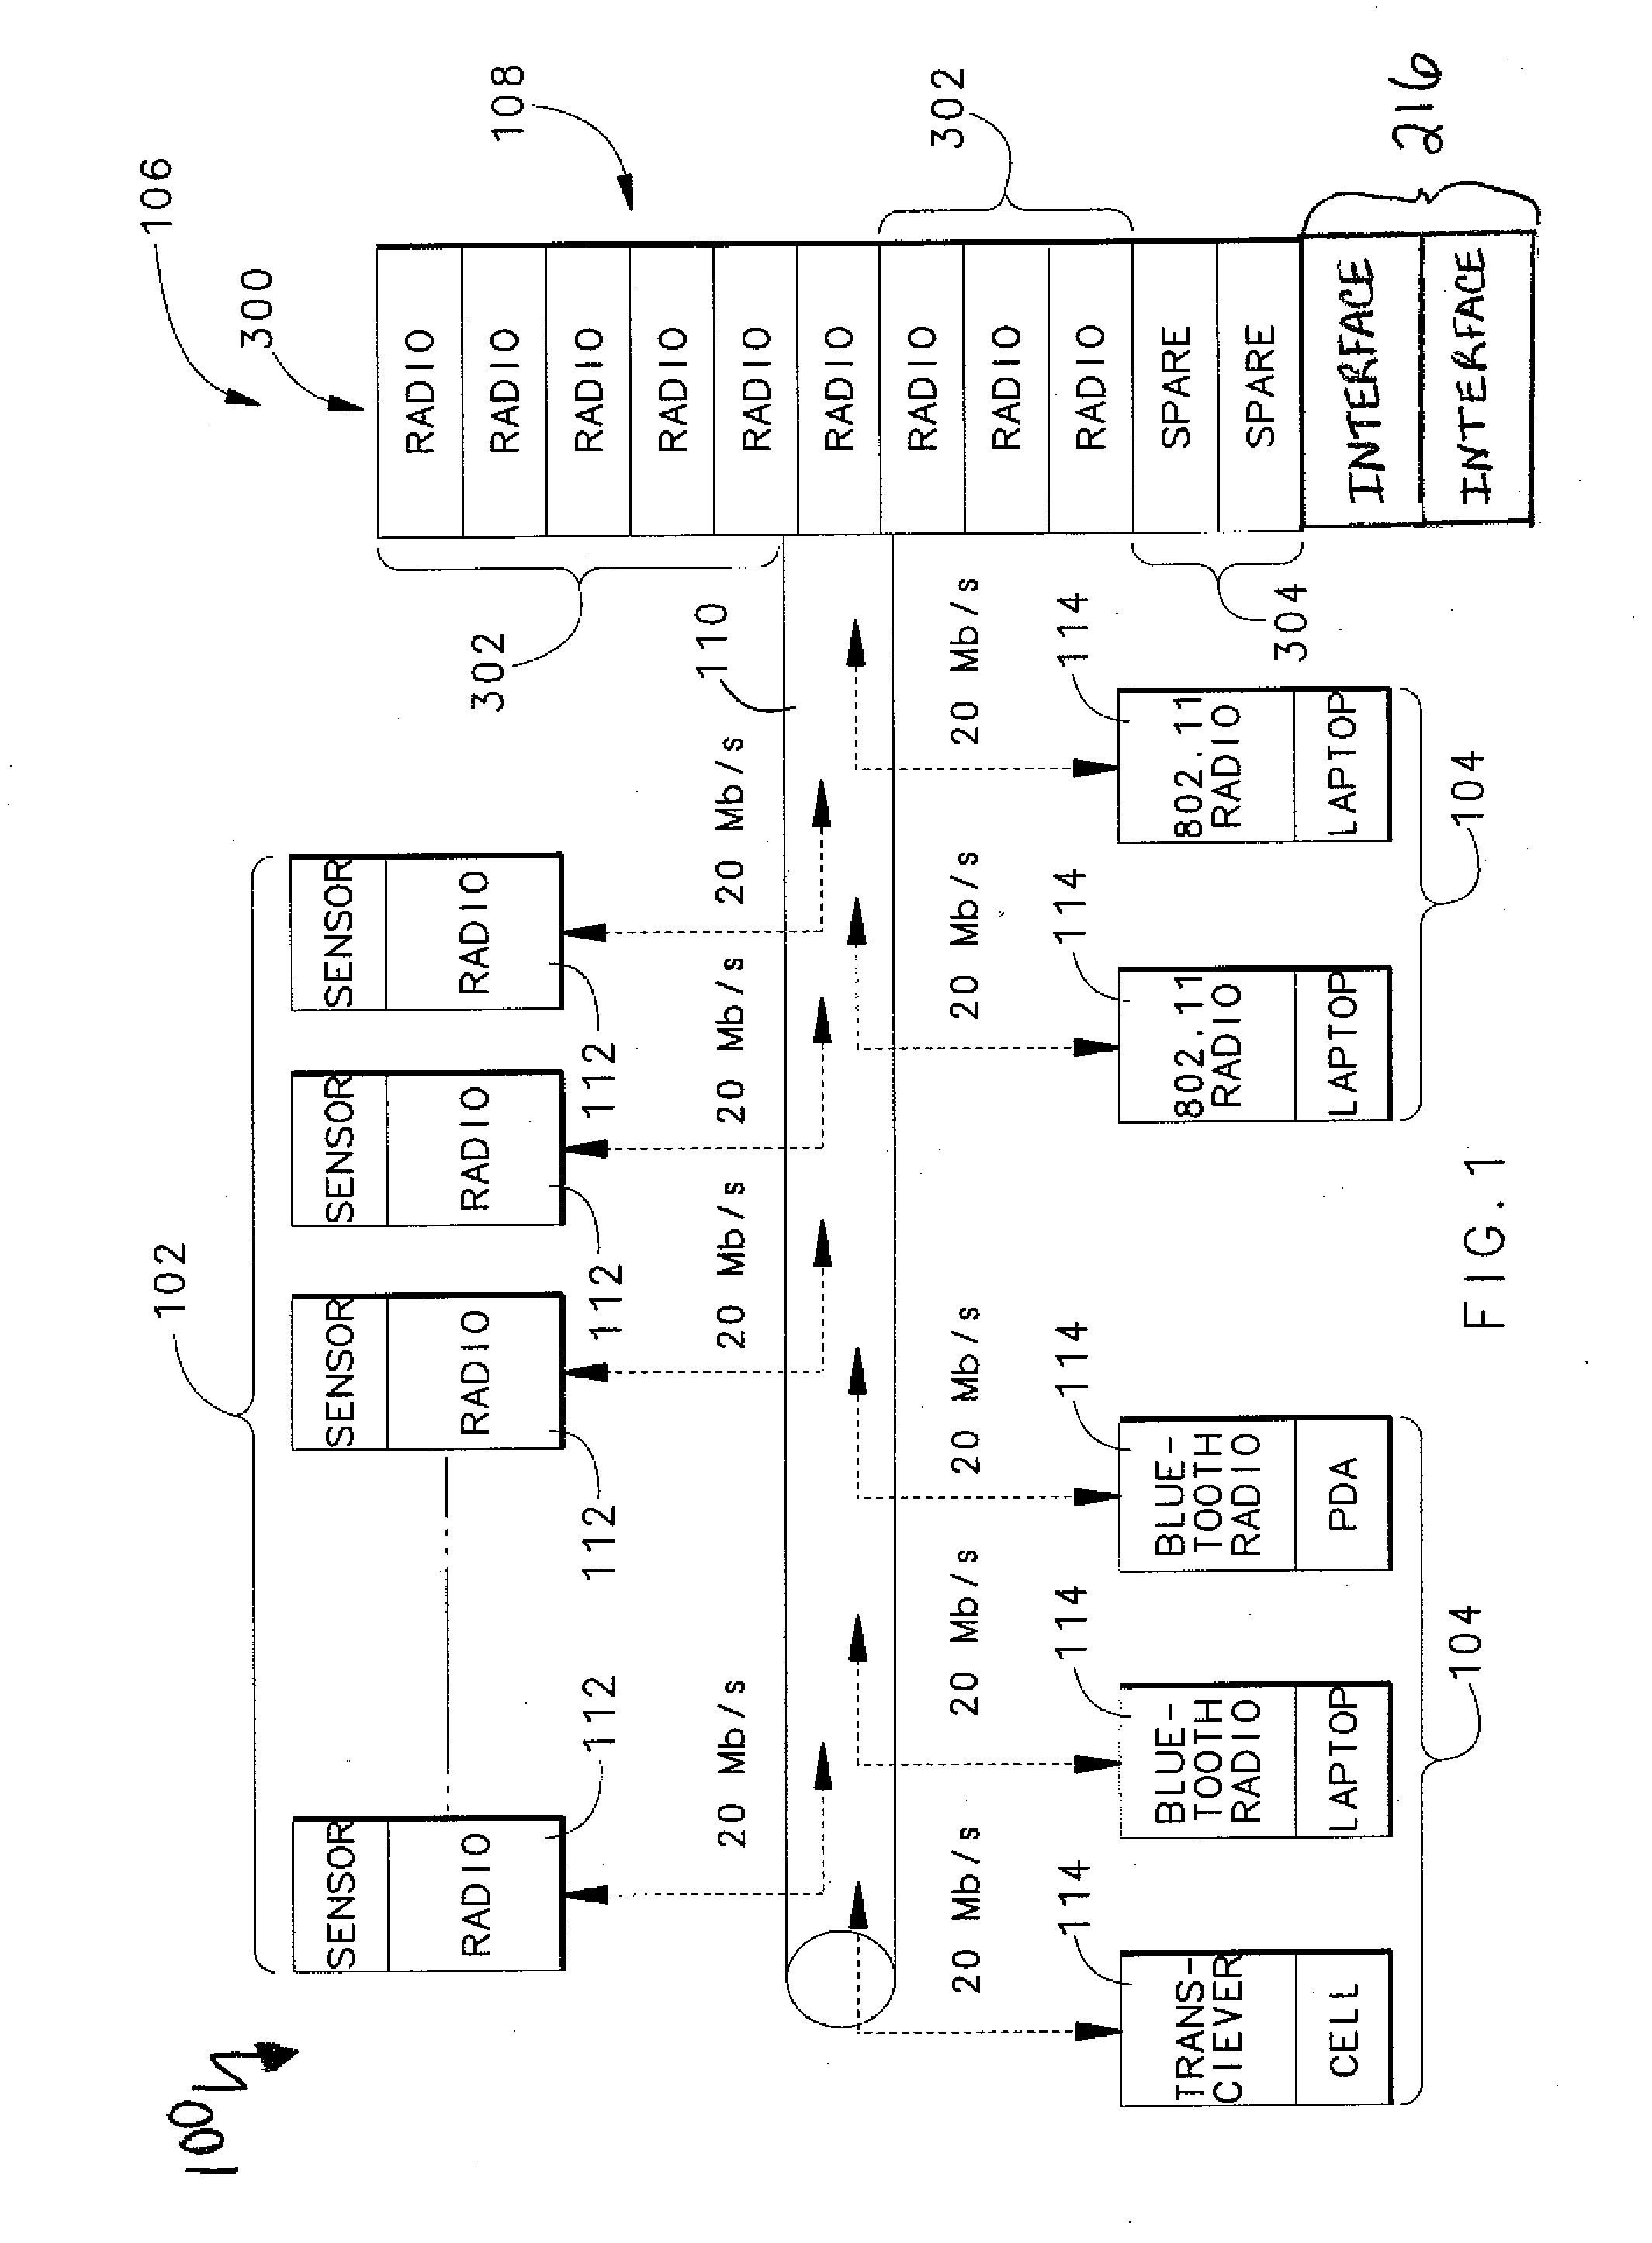 Channel allocation for a multi-device communication system